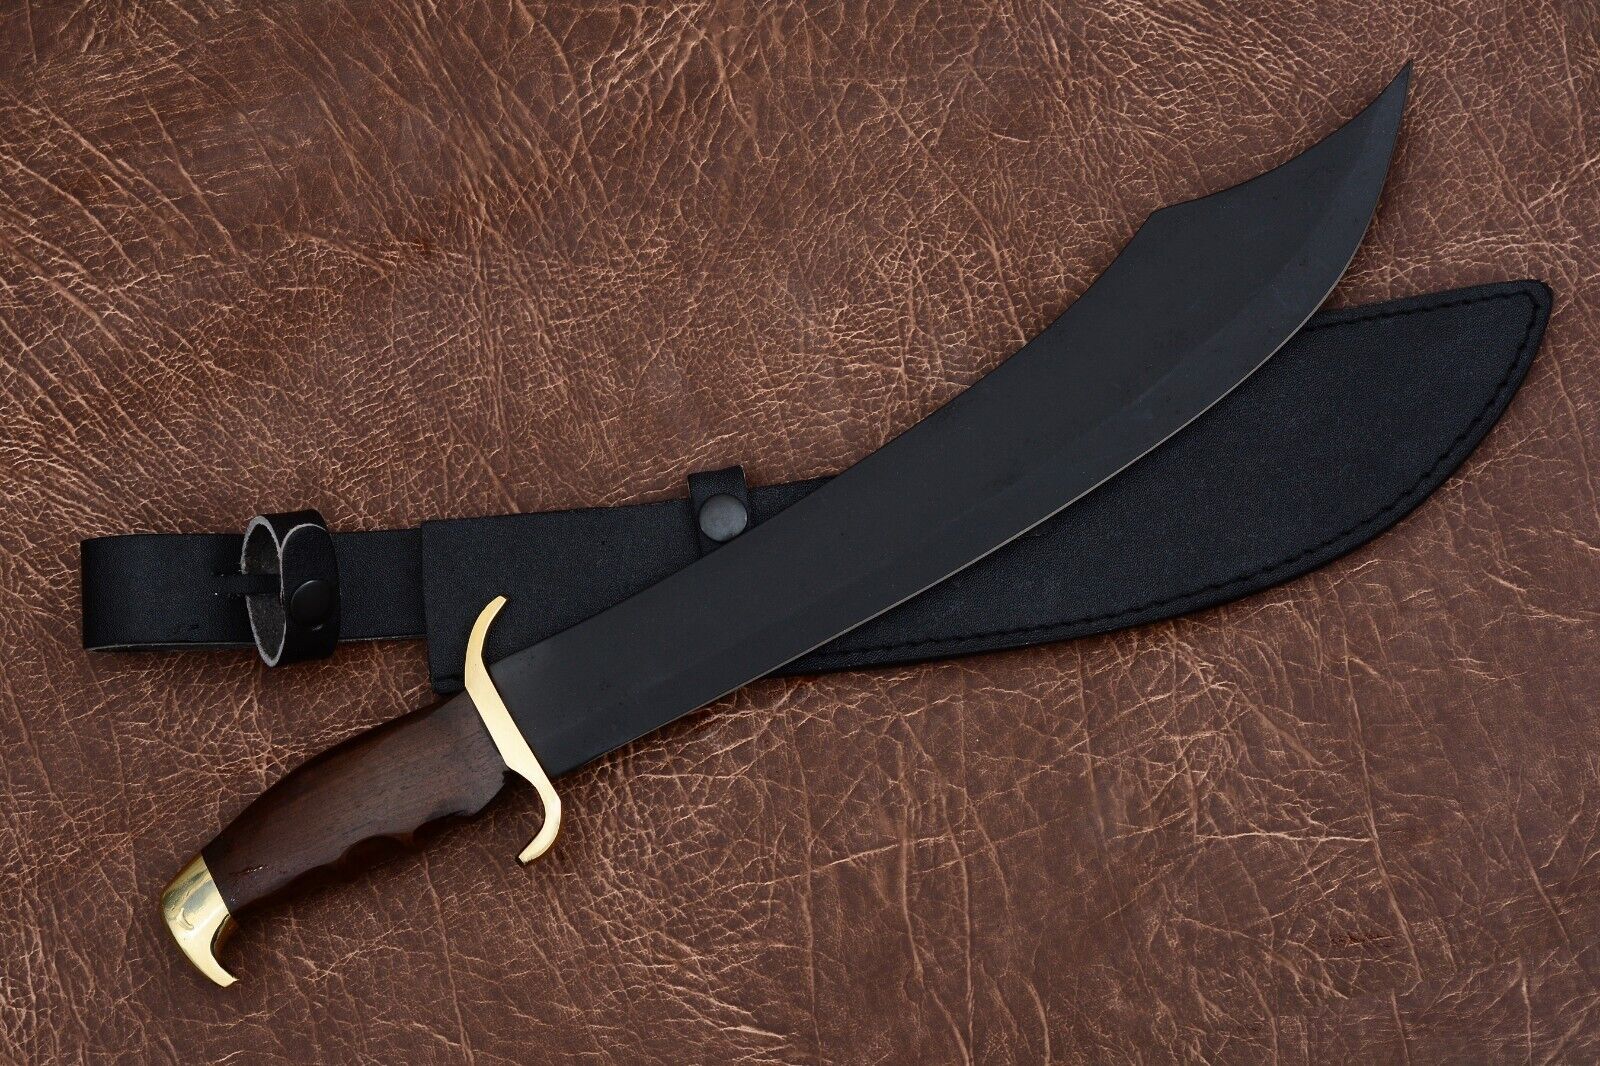 SHARD™ CUSTOM HAND FORGED Carbon Steel Blade Survival Bowie Knife With Sheath